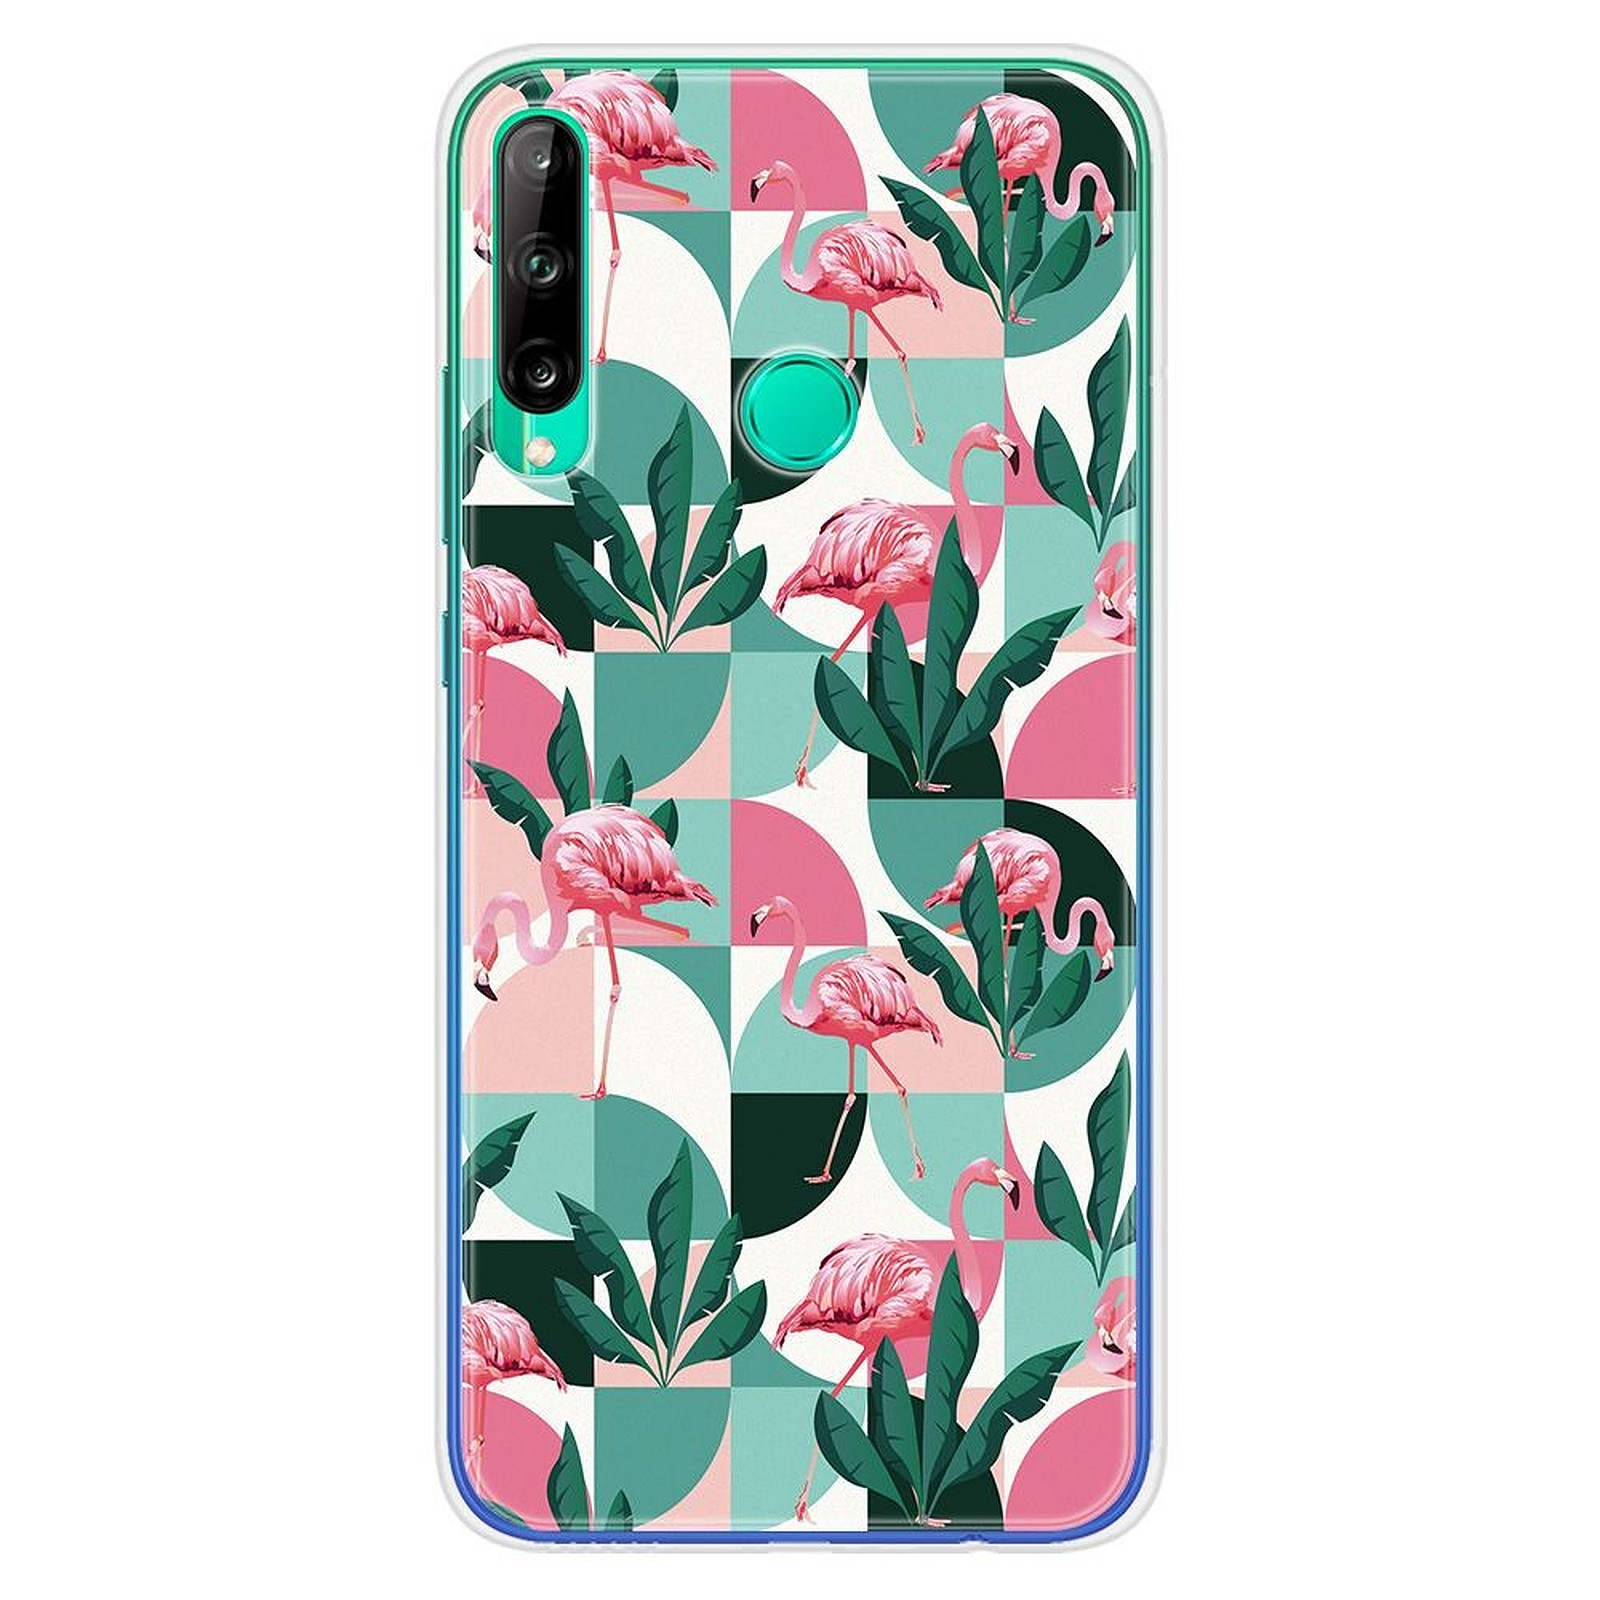 1001 Coques Coque silicone gel Huawei P40 Lite E motif Flamants Roses ge´ome´trique - Coque telephone 1001Coques